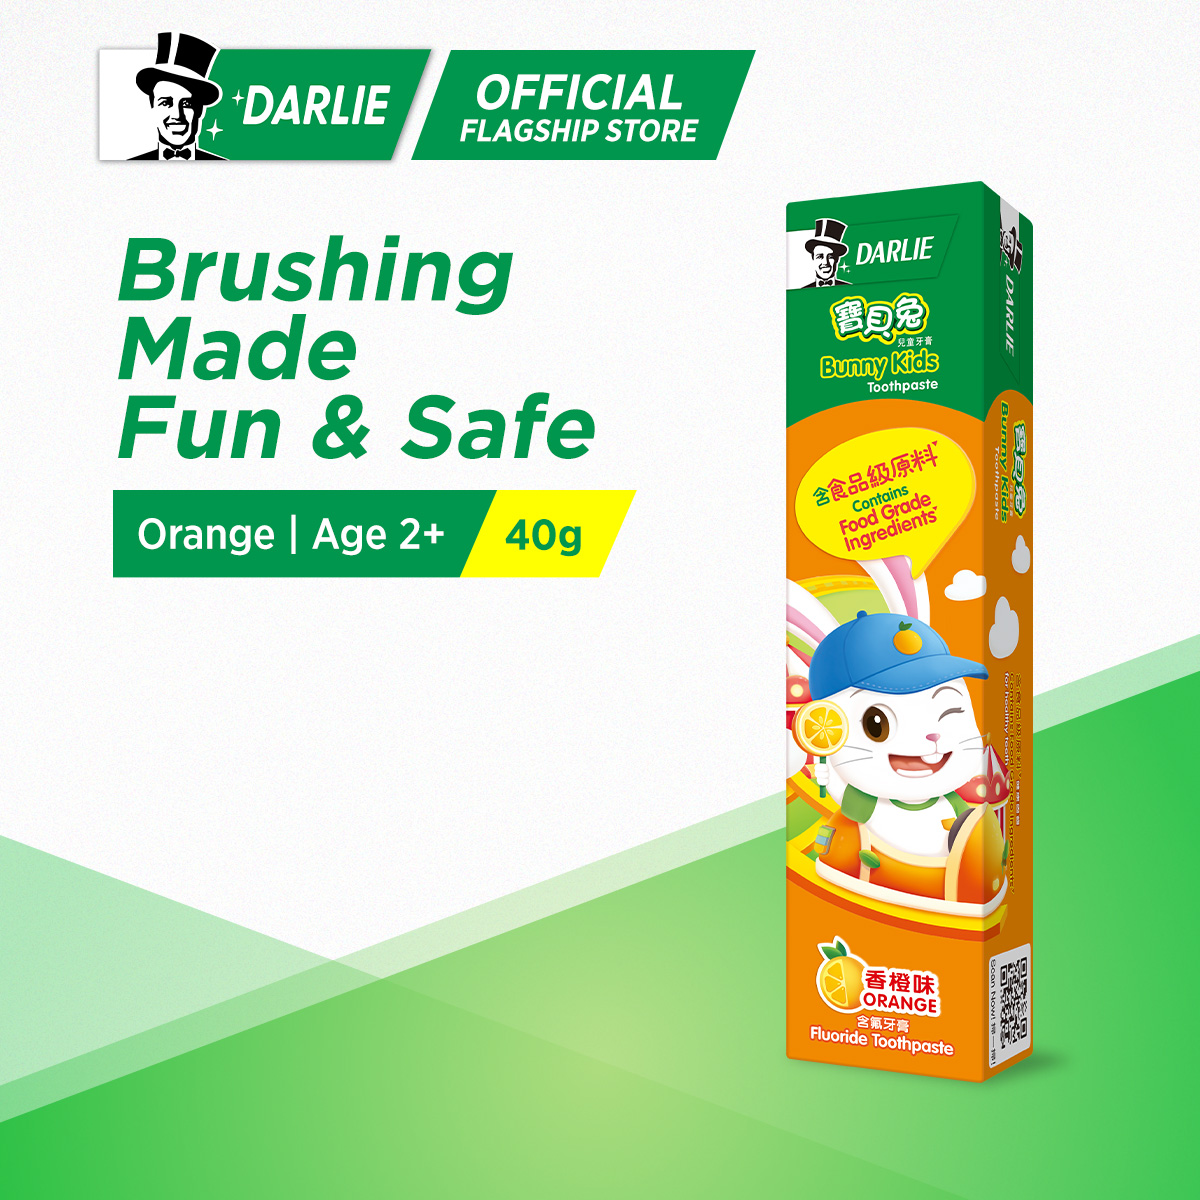 Darlie Bunny Kids Toothpaste Orange (2 Years and Above) 40g